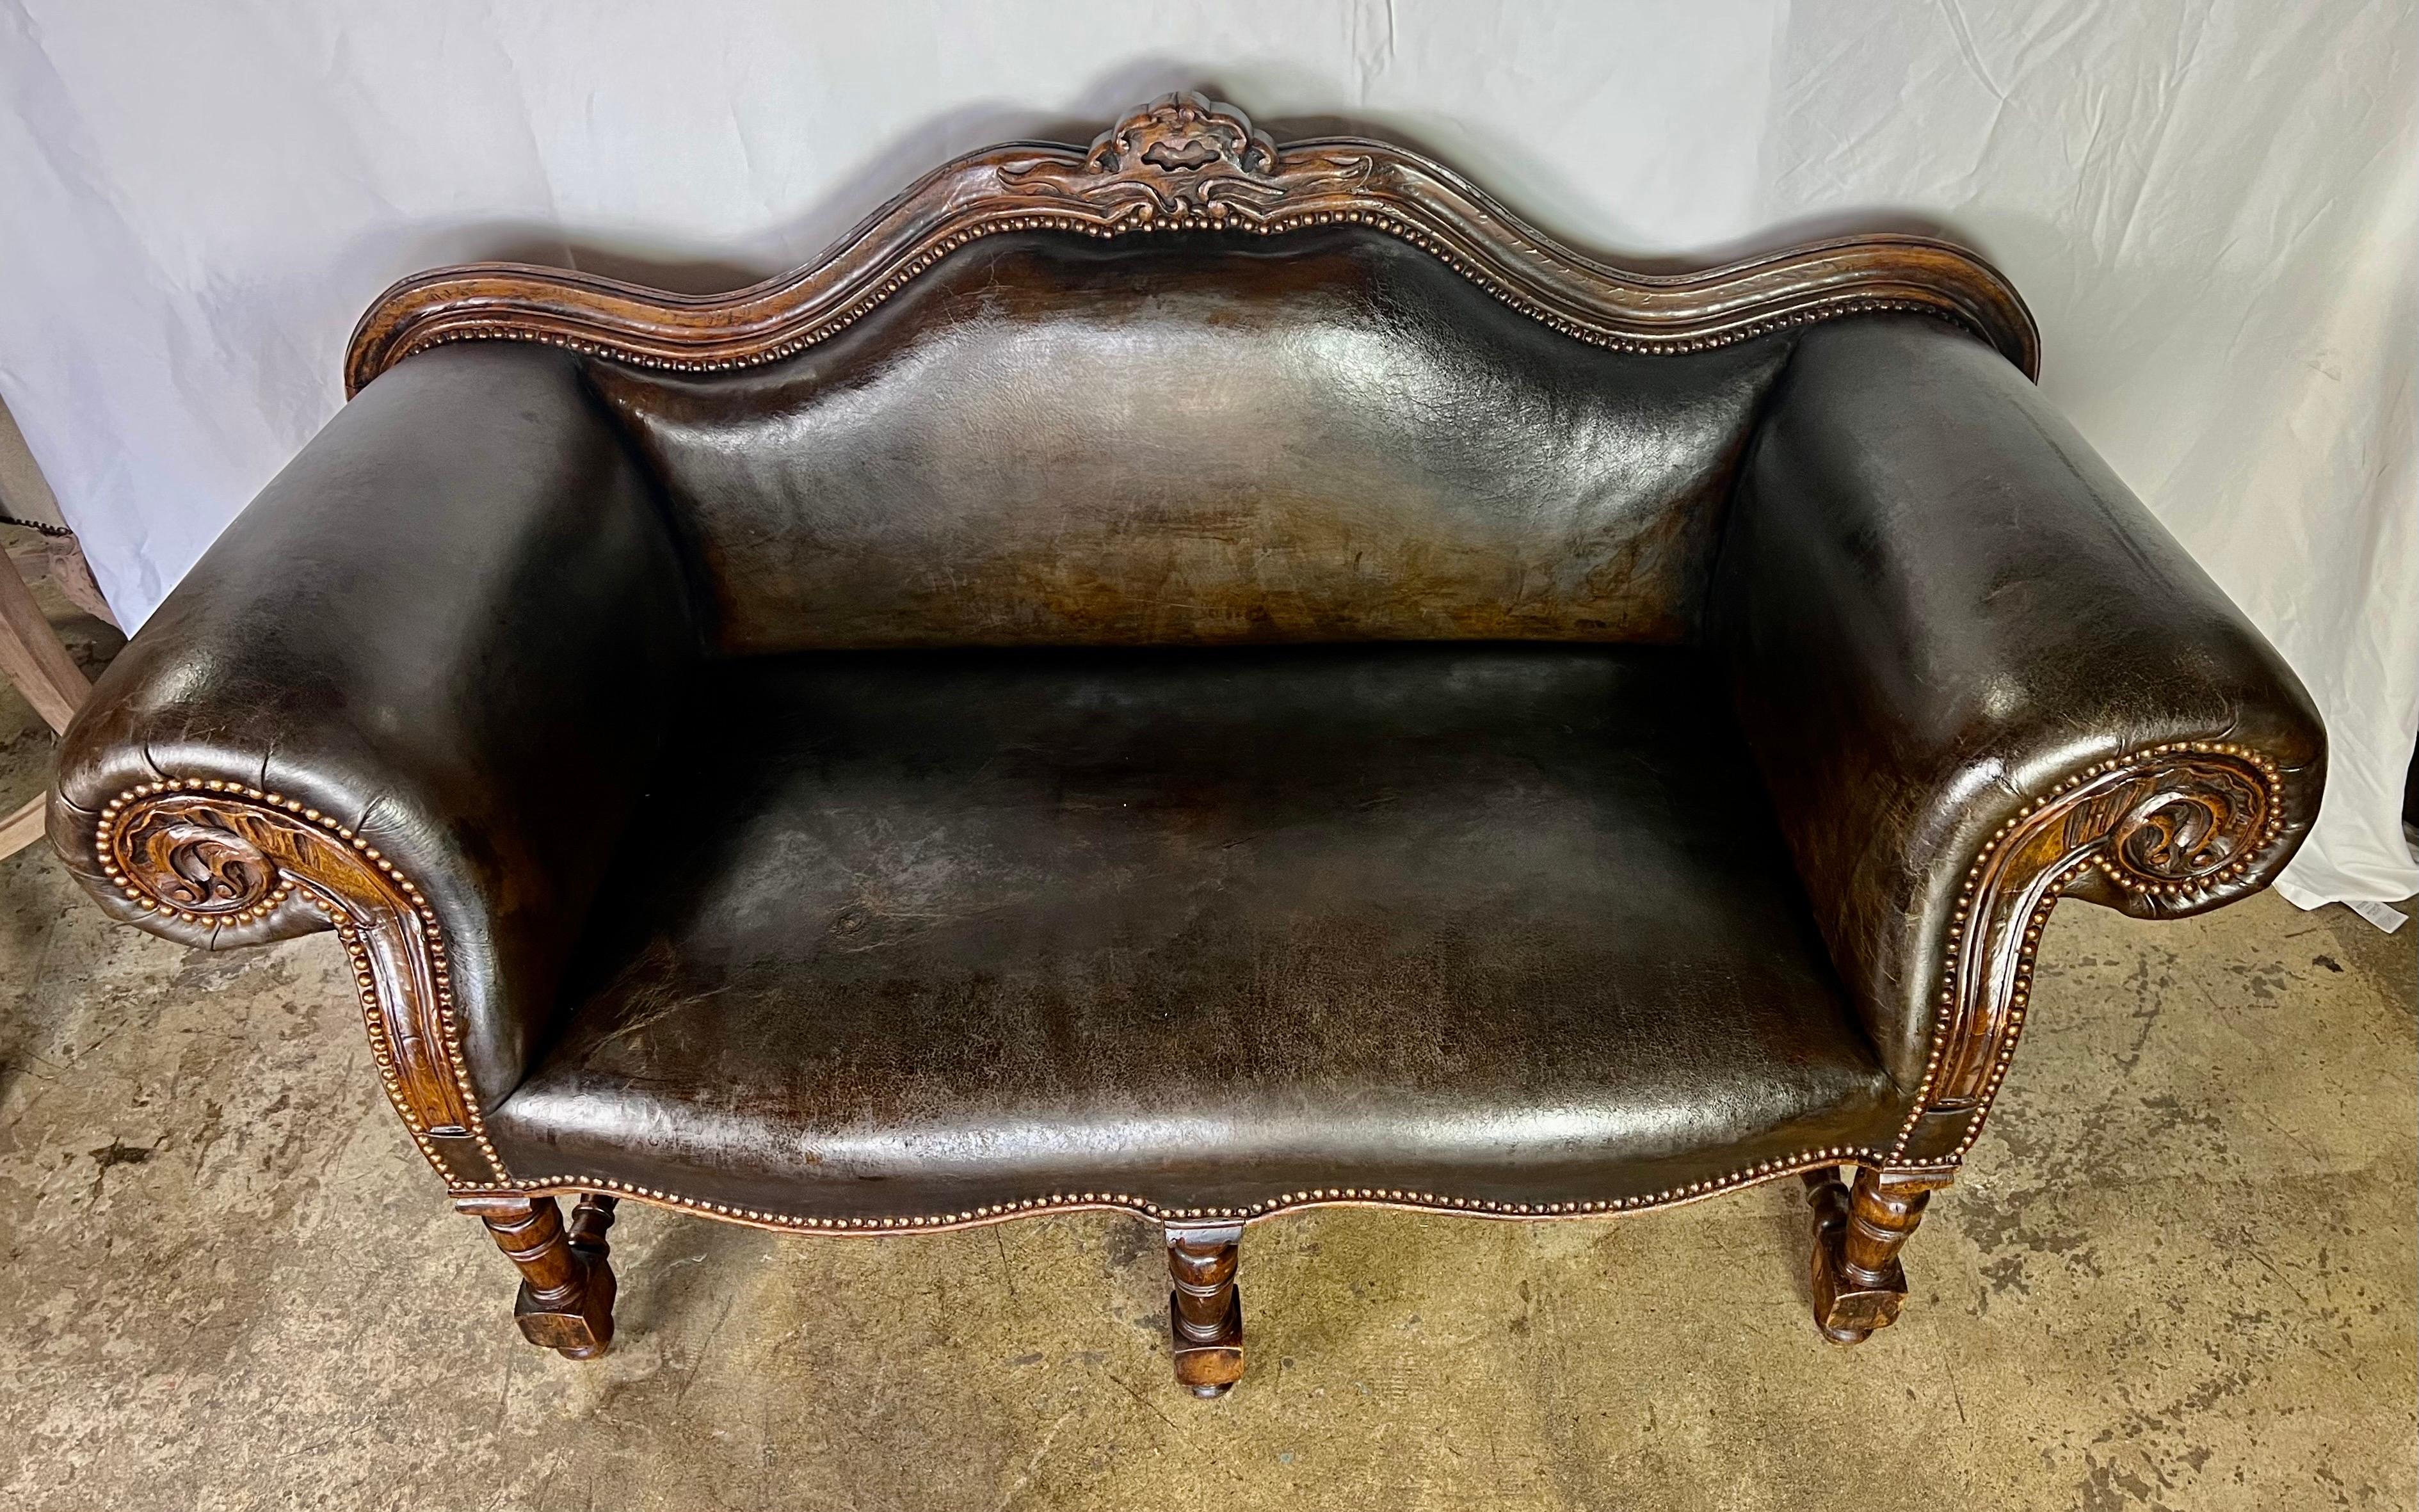 Early 20th Century Georgian leather rolled arm settee.   The back has an eyebrow shape with carving at the top.  The sofa stands on six legs that are connected by a bottom stretcher. Leather is distressed by is still intact.